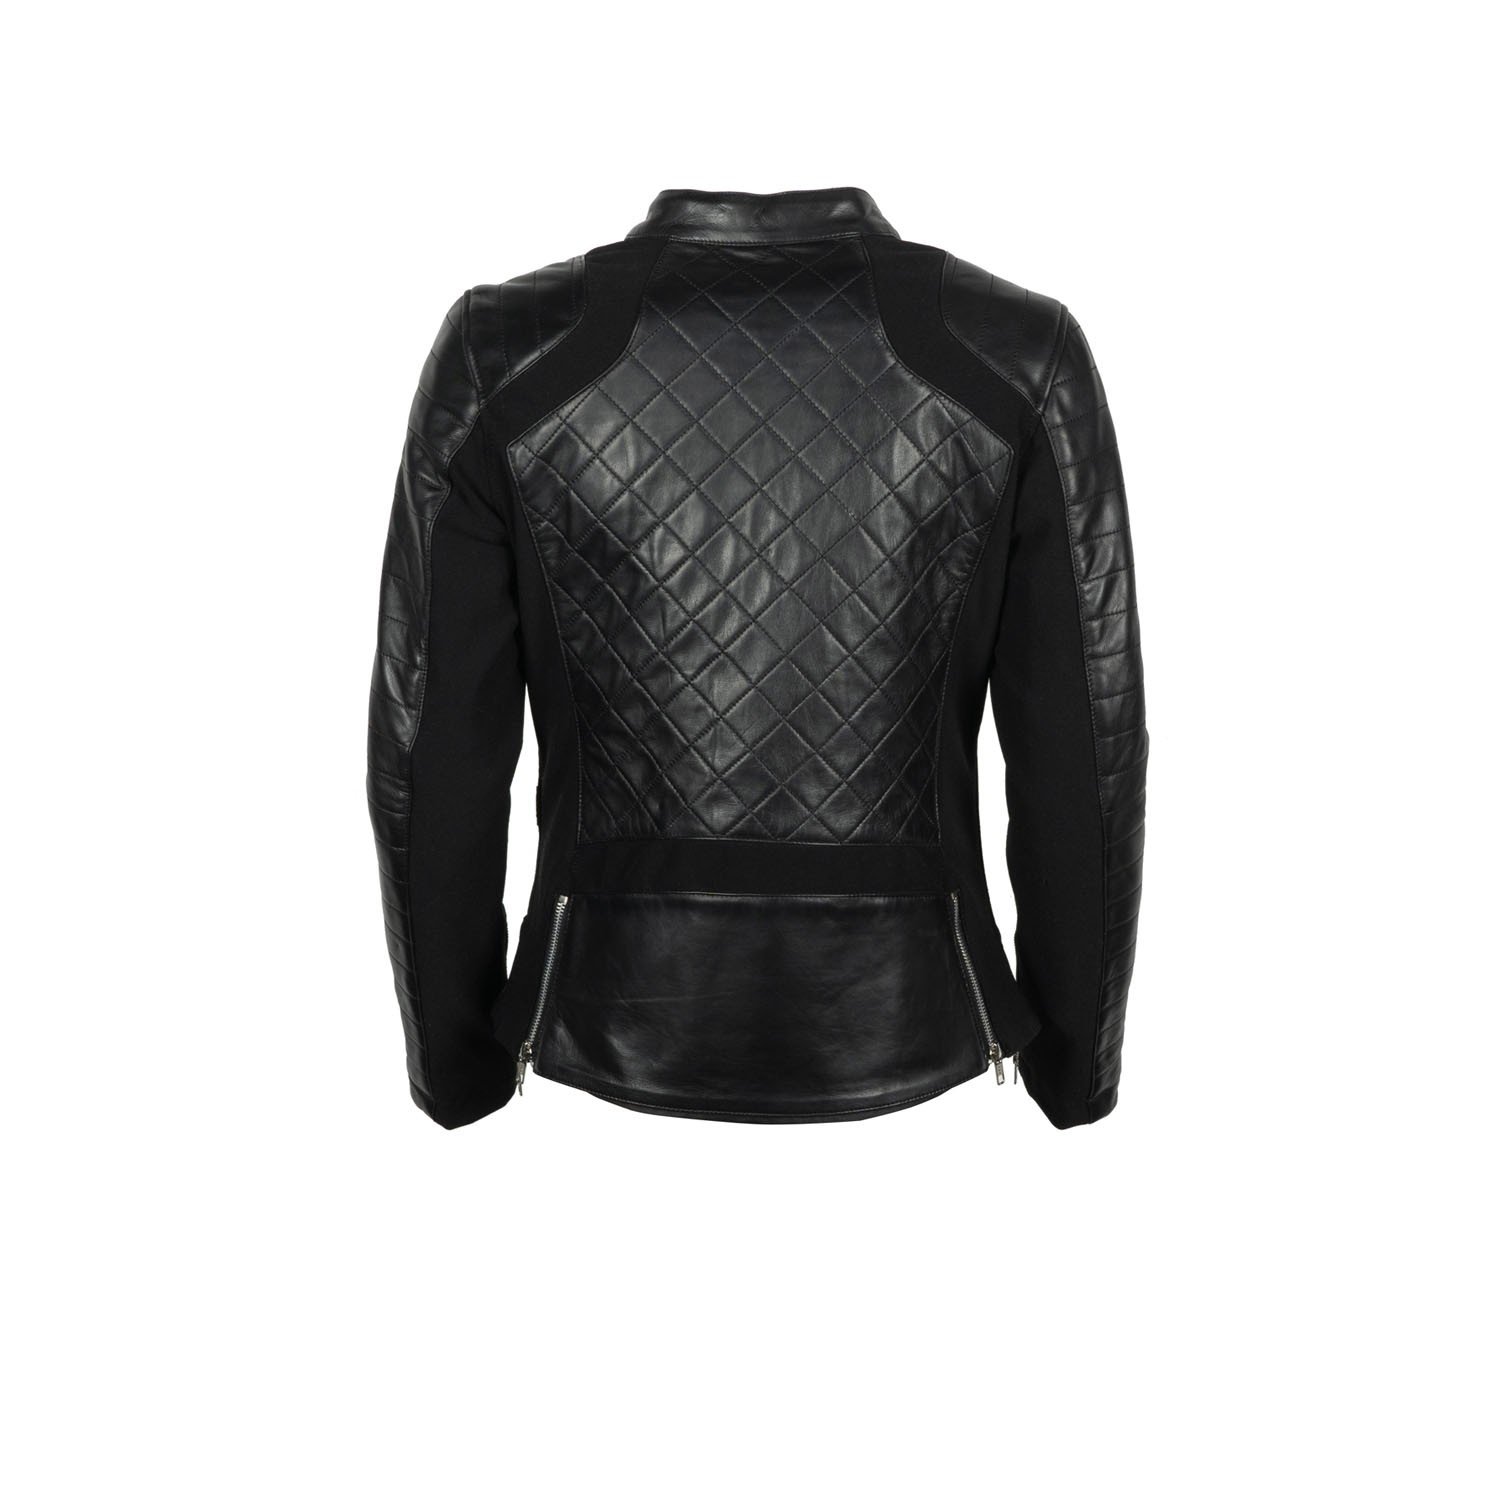 Image of Helstons Kate Leather Soft Stretch Jacket Black Size XL ID 3662136085053